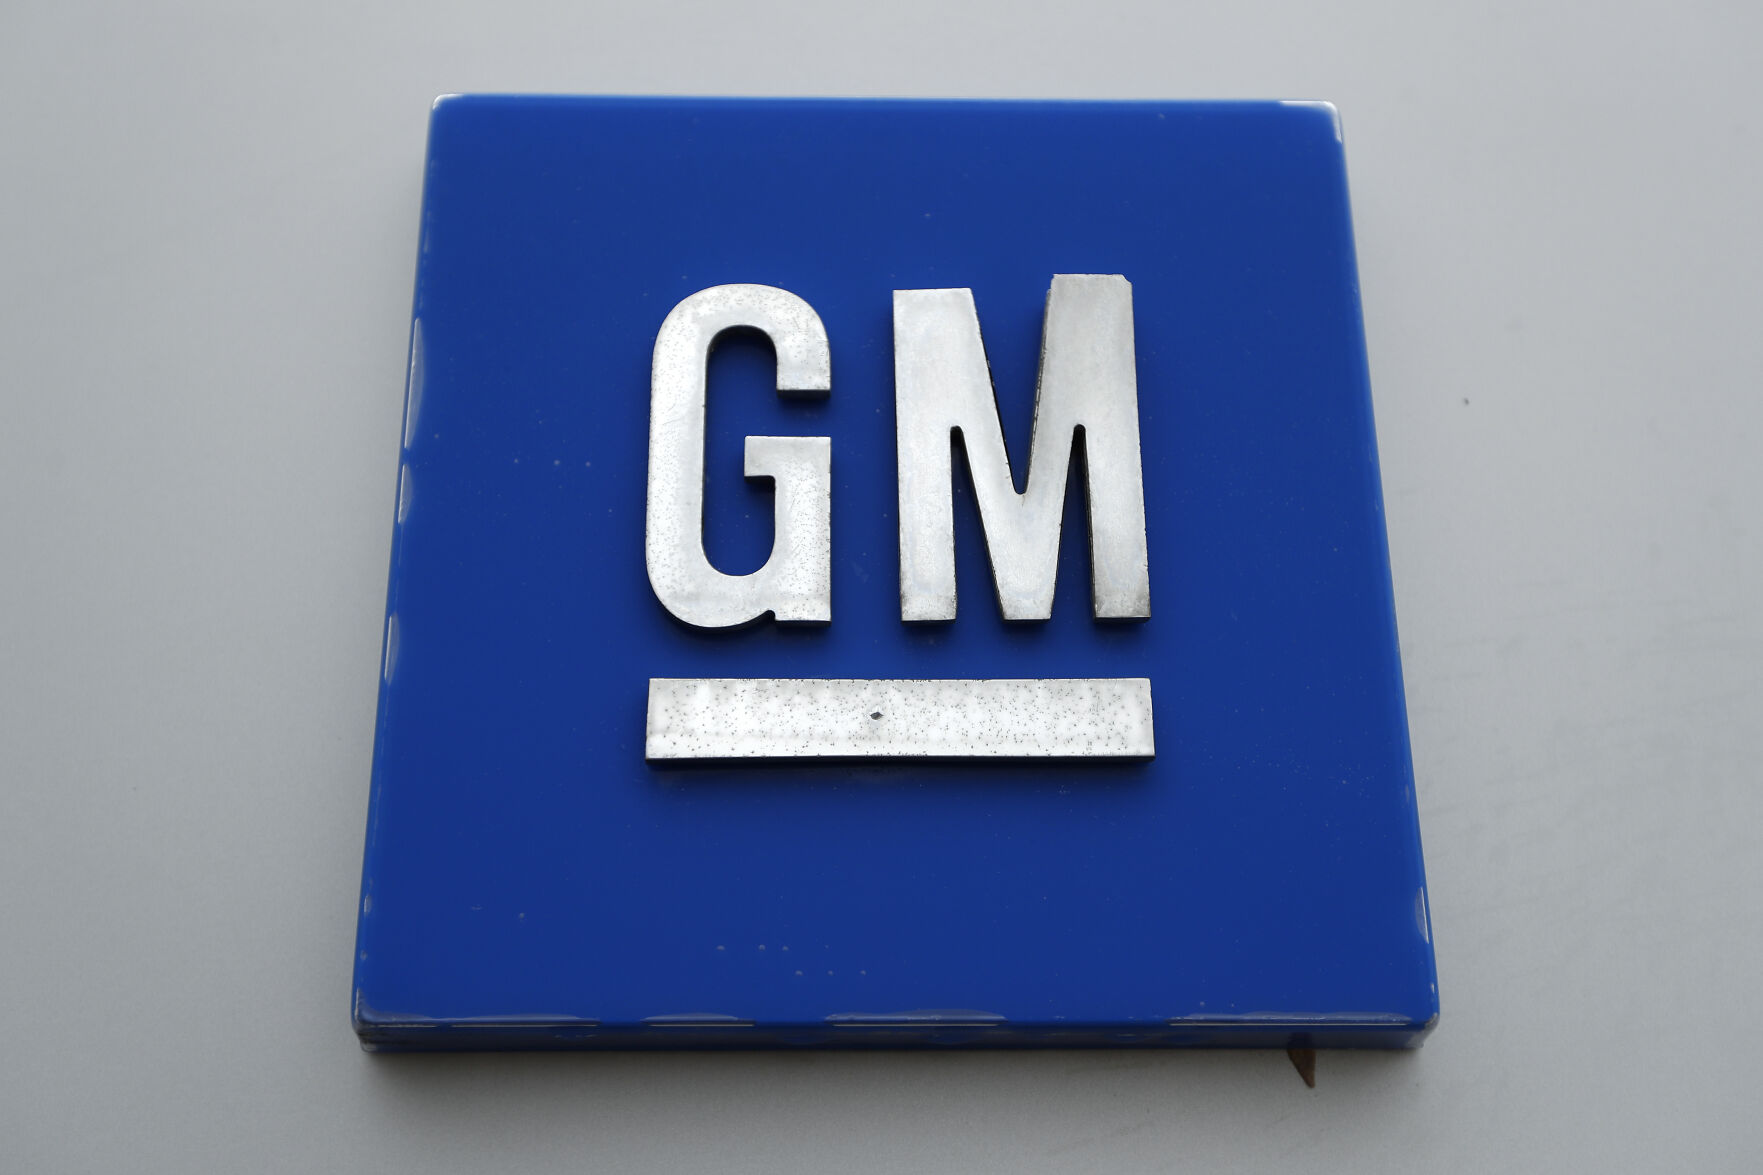 <p>FILE - The General Motors logo is displayed outside the General Motors Detroit-Hamtramck Assembly plant, Jan. 27, 2020, in Hamtramck, Mich. General Motors is offering buyouts to most of its U.S. salaried workforce and some global executives in an effort to trim costs as it makes the transition to electric vehicles. (AP Photo/Paul Sancya, File)</p>   PHOTO CREDIT: Paul Sancya 